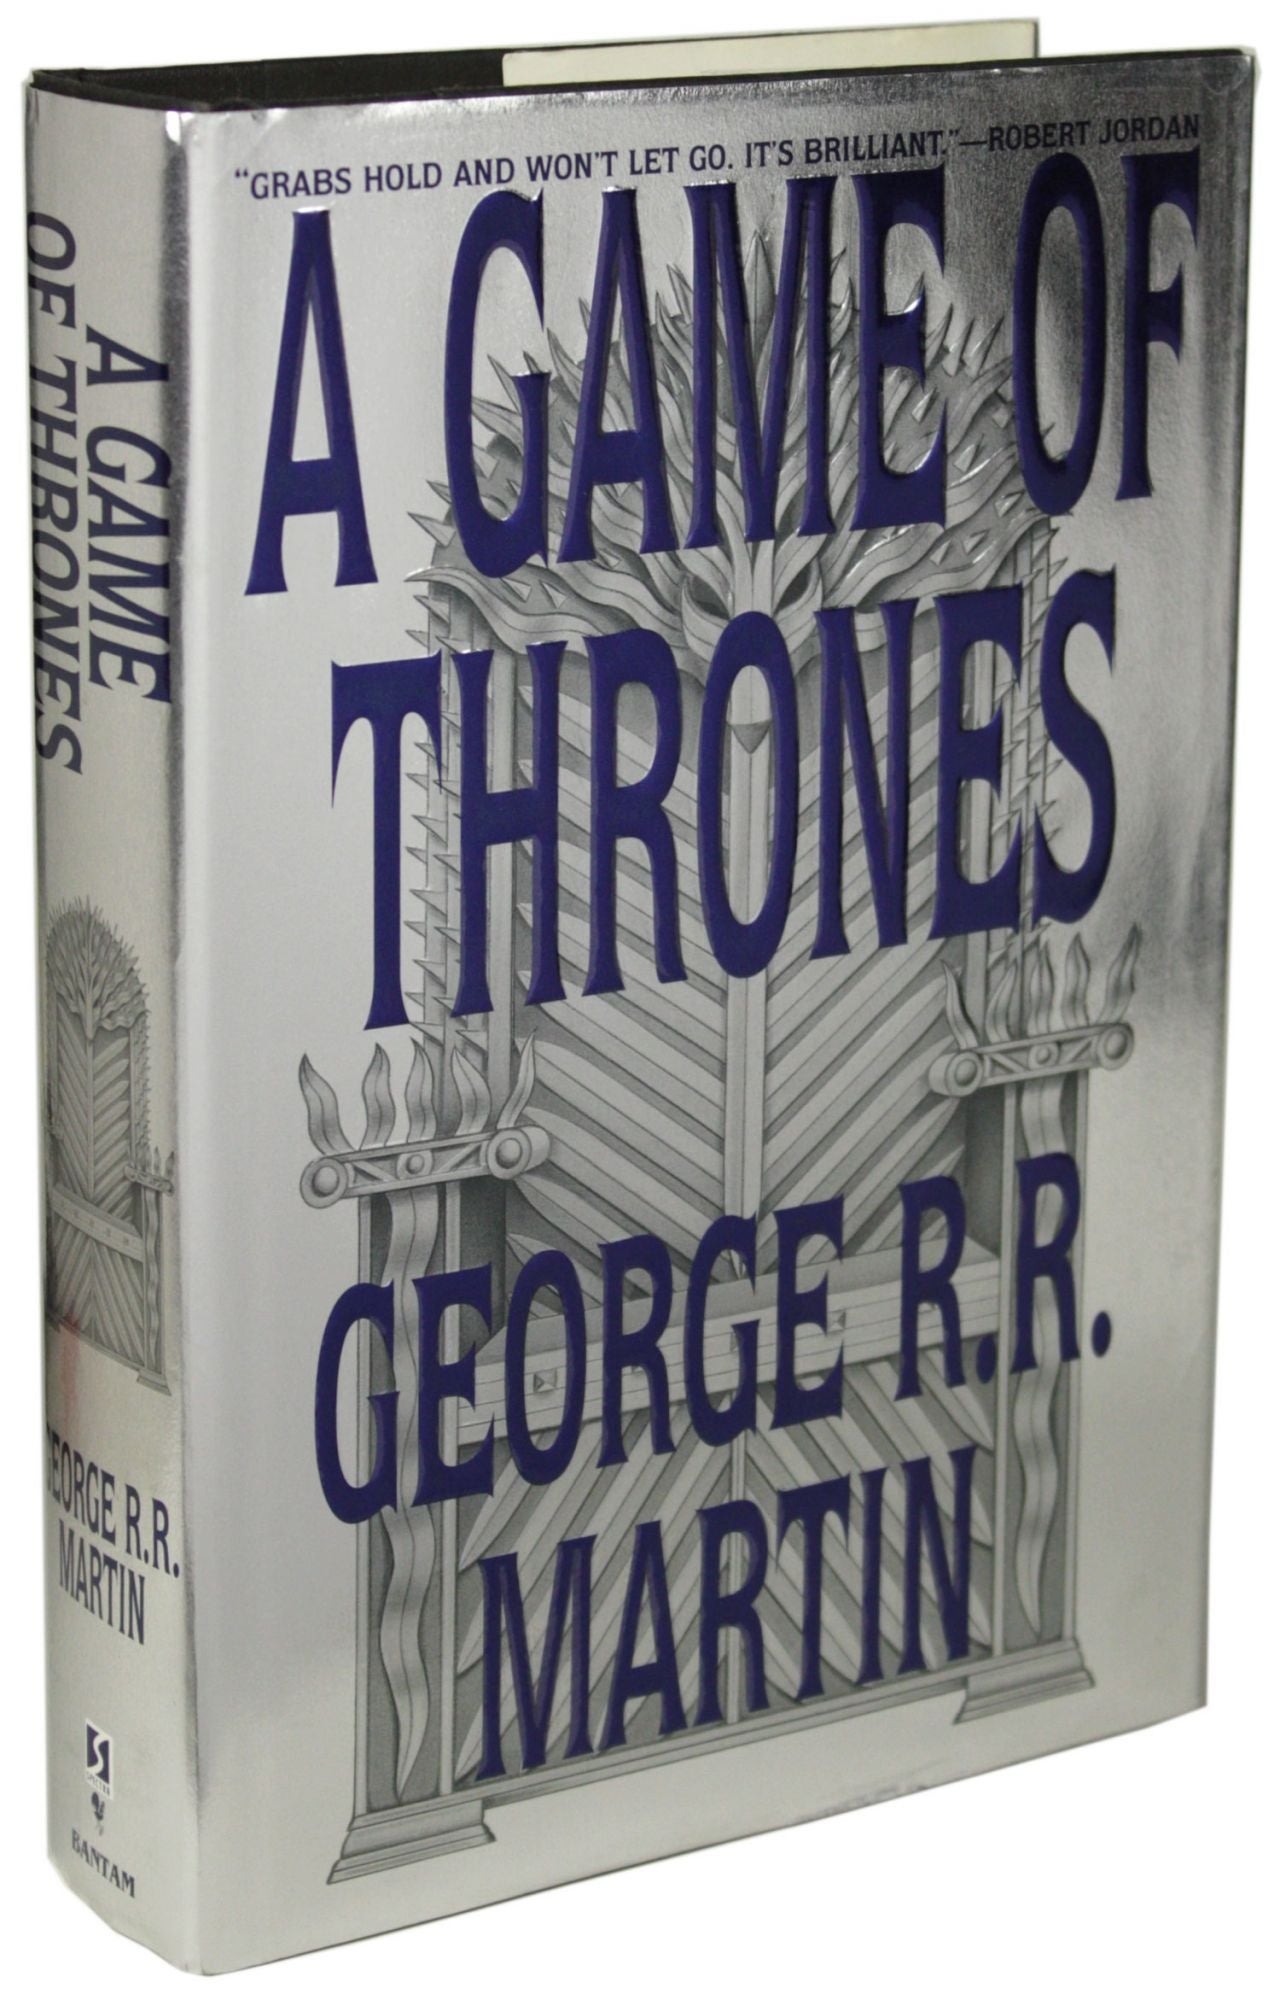 A Clash of Kings (A Song of Ice & Fire) by George R. R. Martin